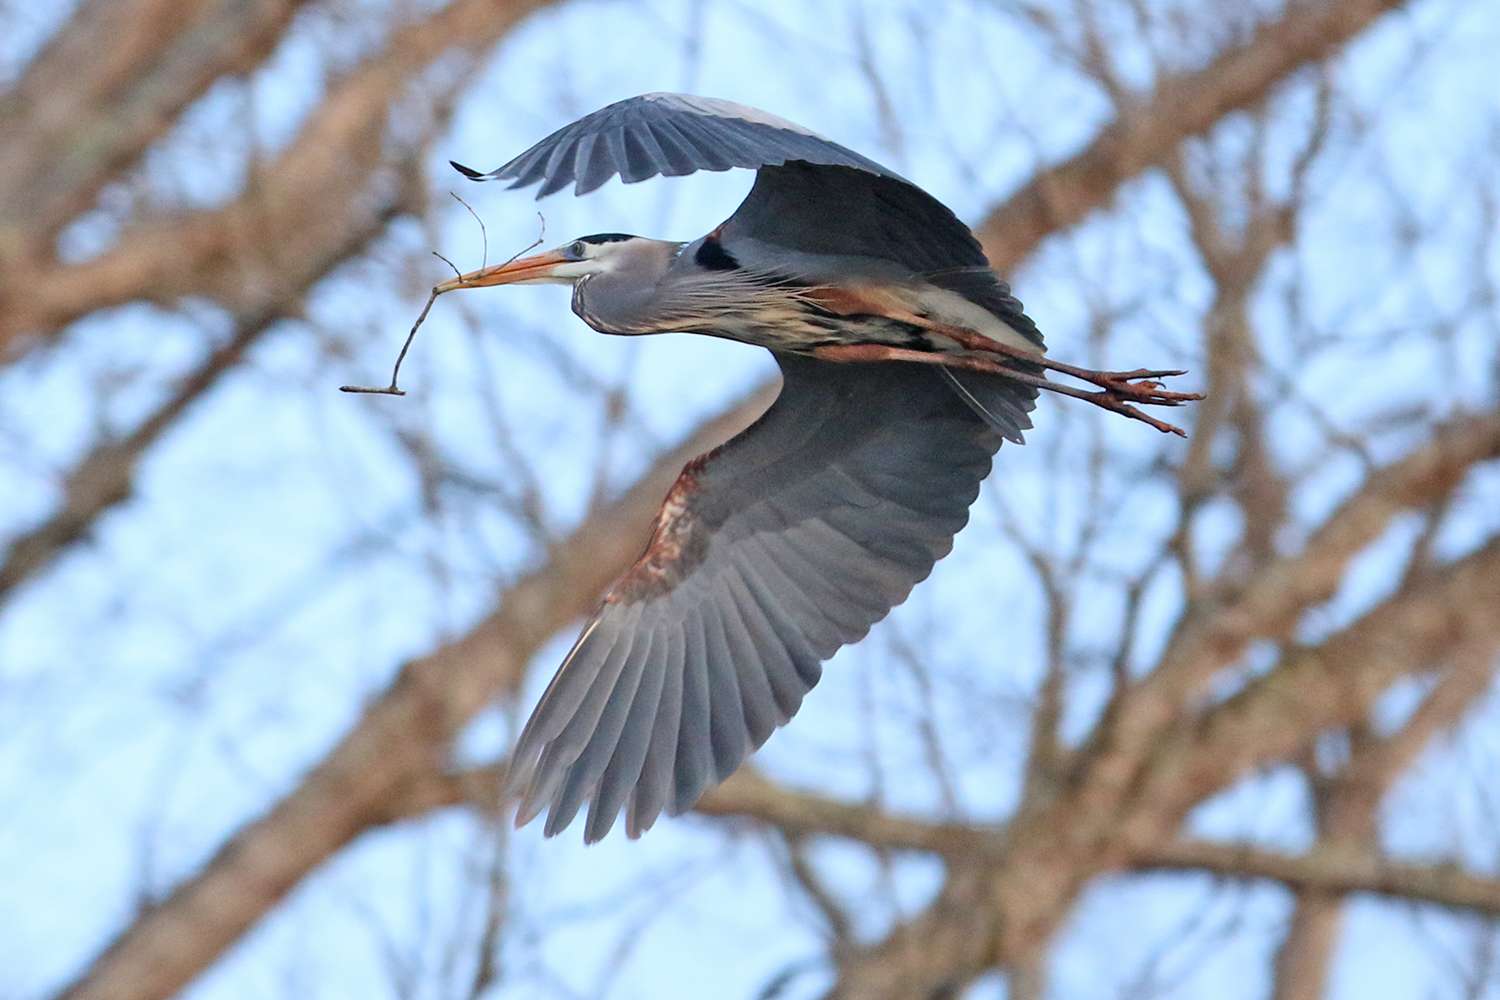 Great blue heron, 2019 Bassmaster Classic out of Knoxville, Tenn.